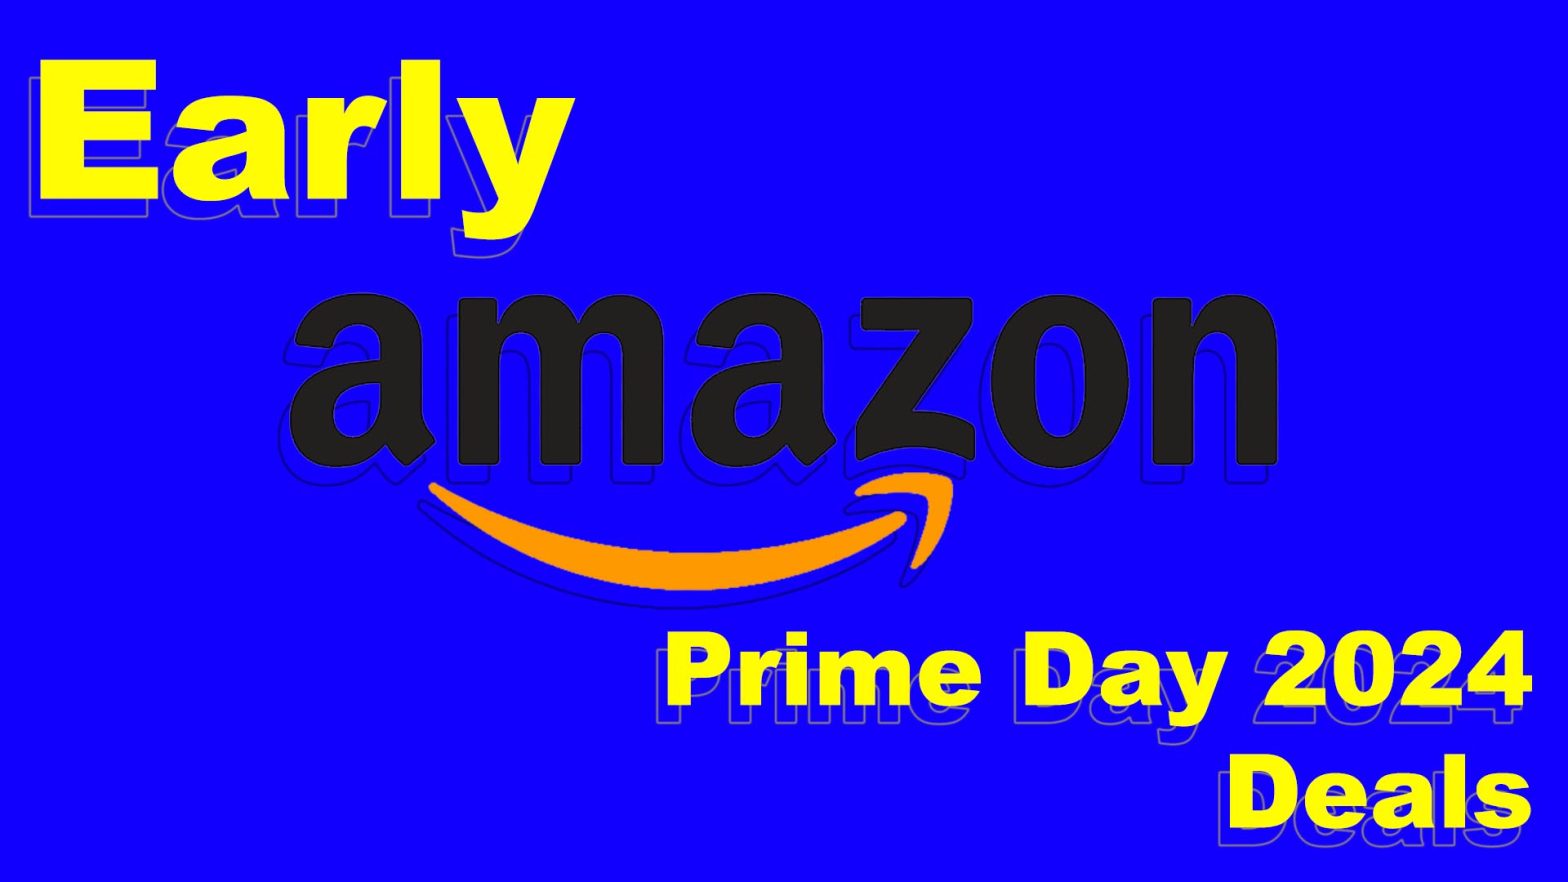 Here are some amazing early Amazon Prime Day 2024 deals